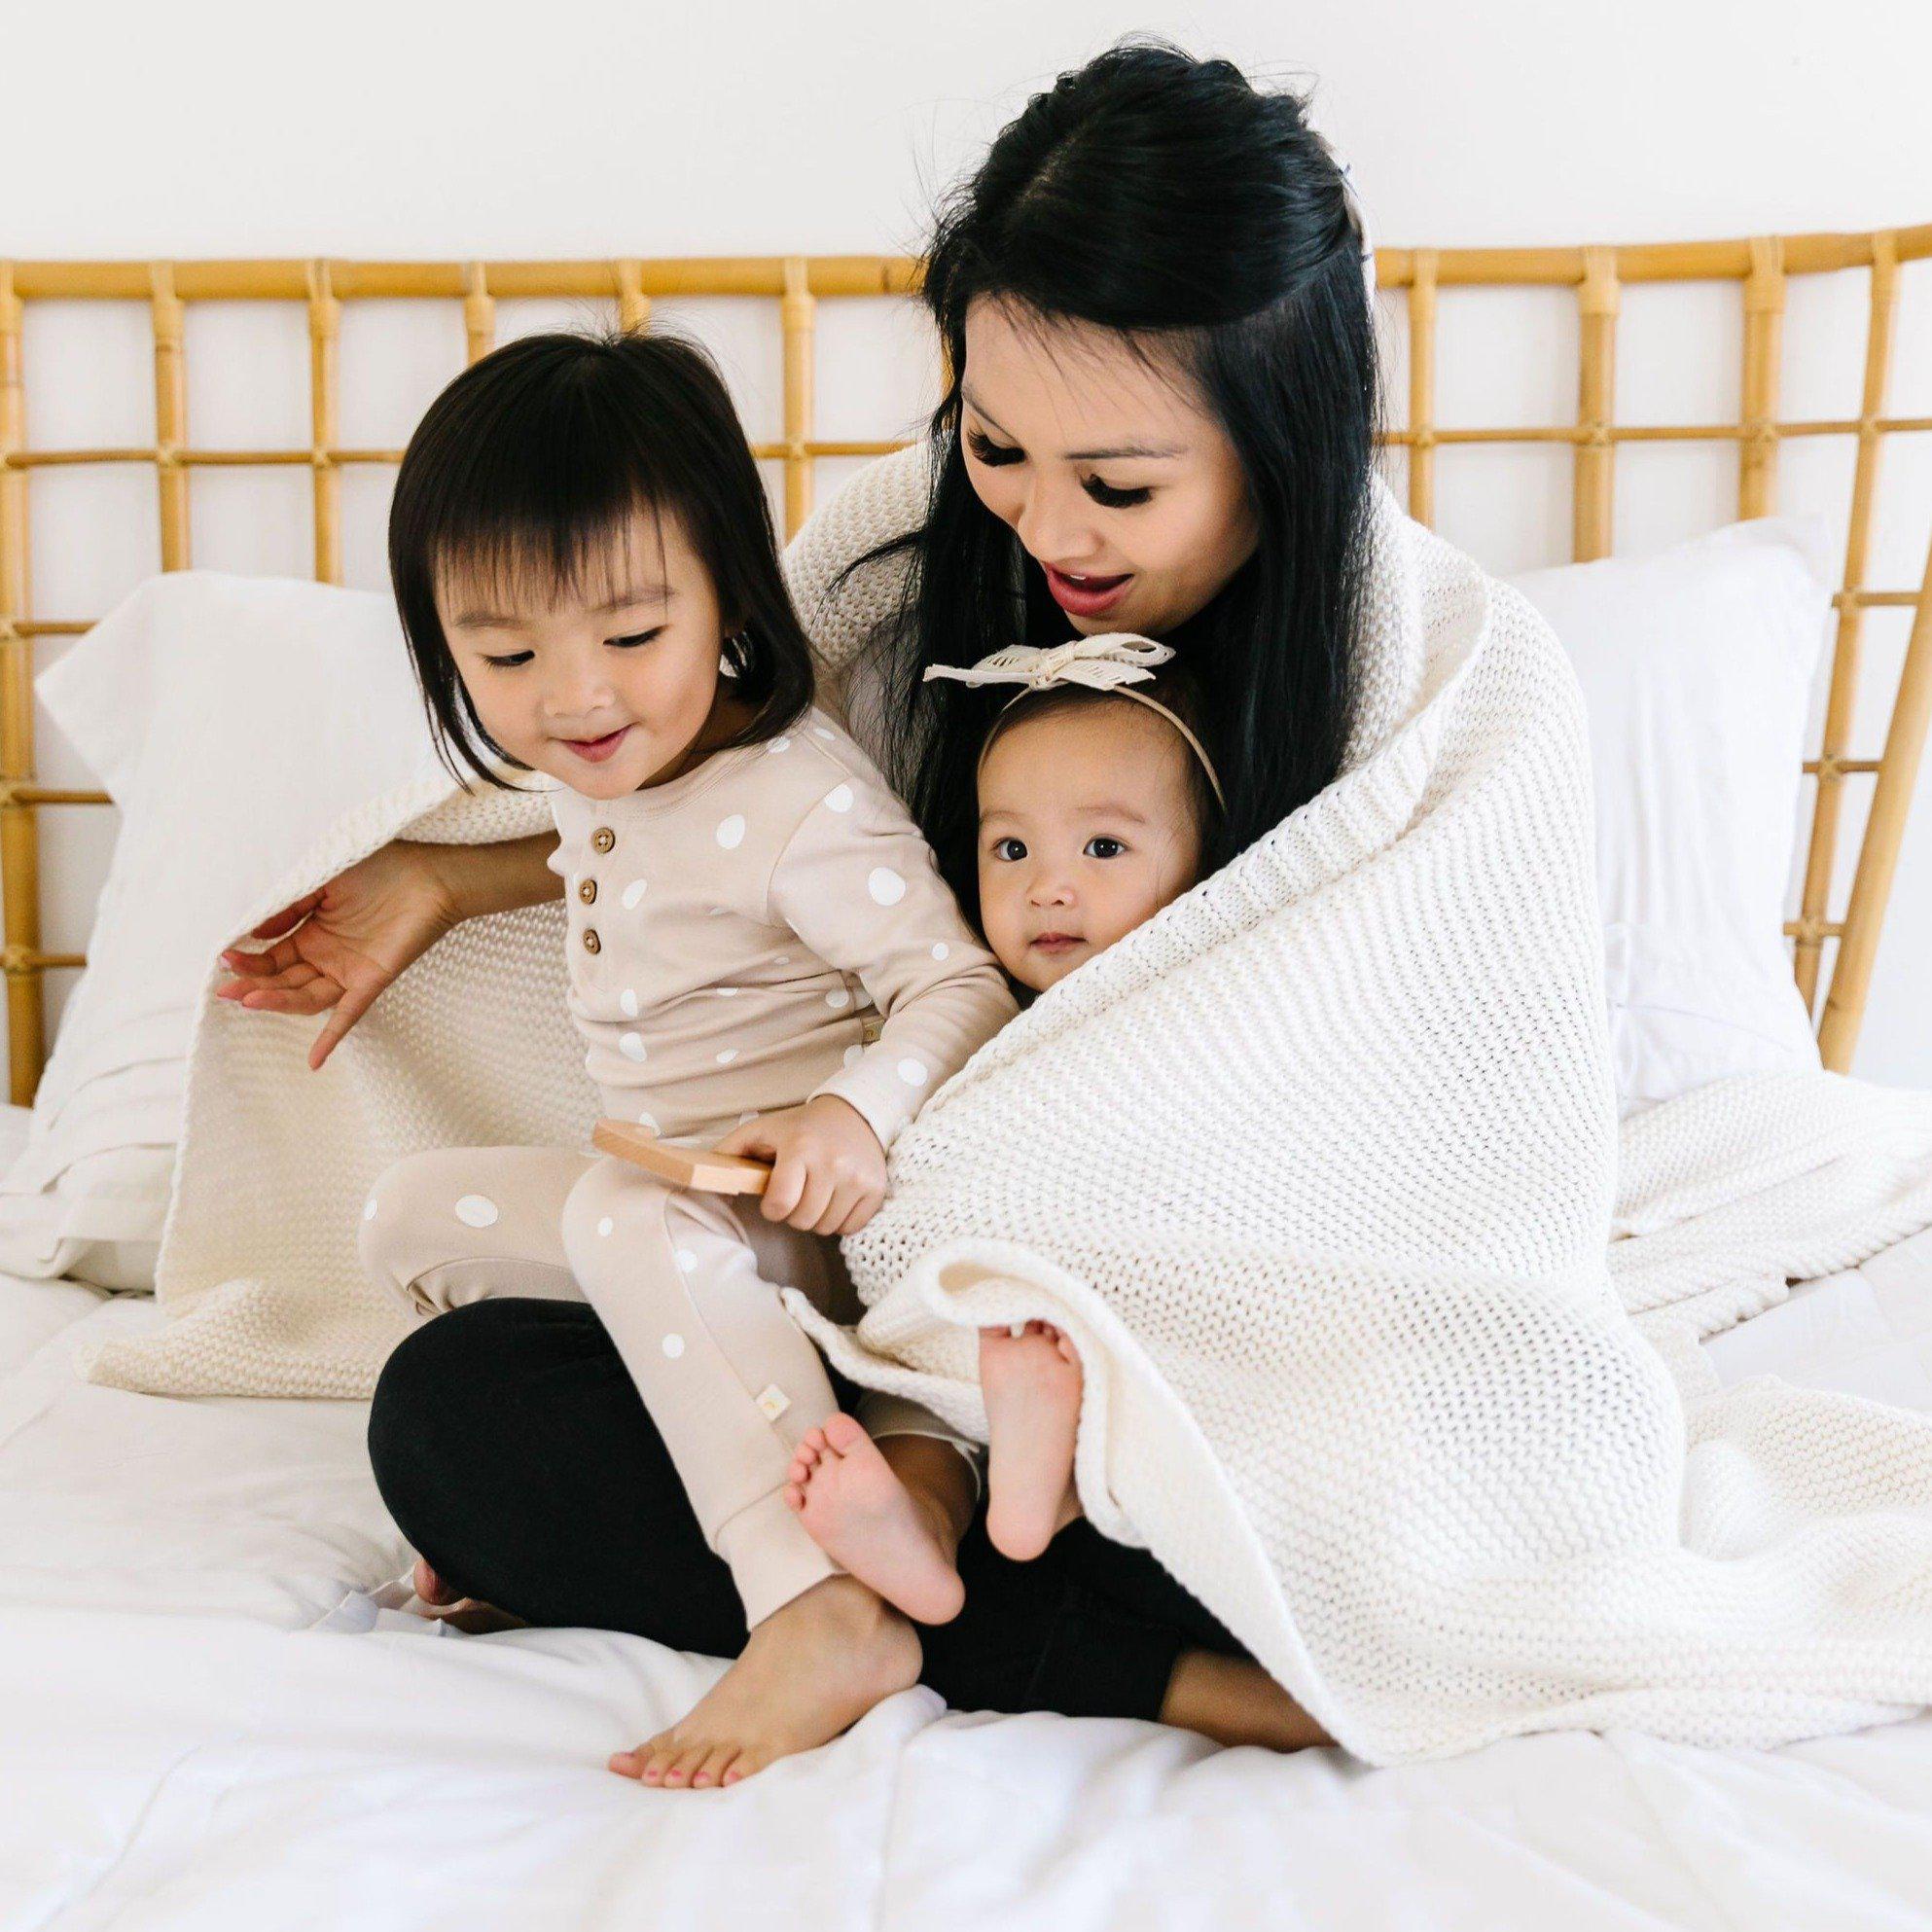 A mother and her two young children, a toddler and a baby, enjoy time together on a bed covered with a Chunky Knit Throw Blanket - Ella Ivory from Makemake Organics, smiling and interacting playfully.